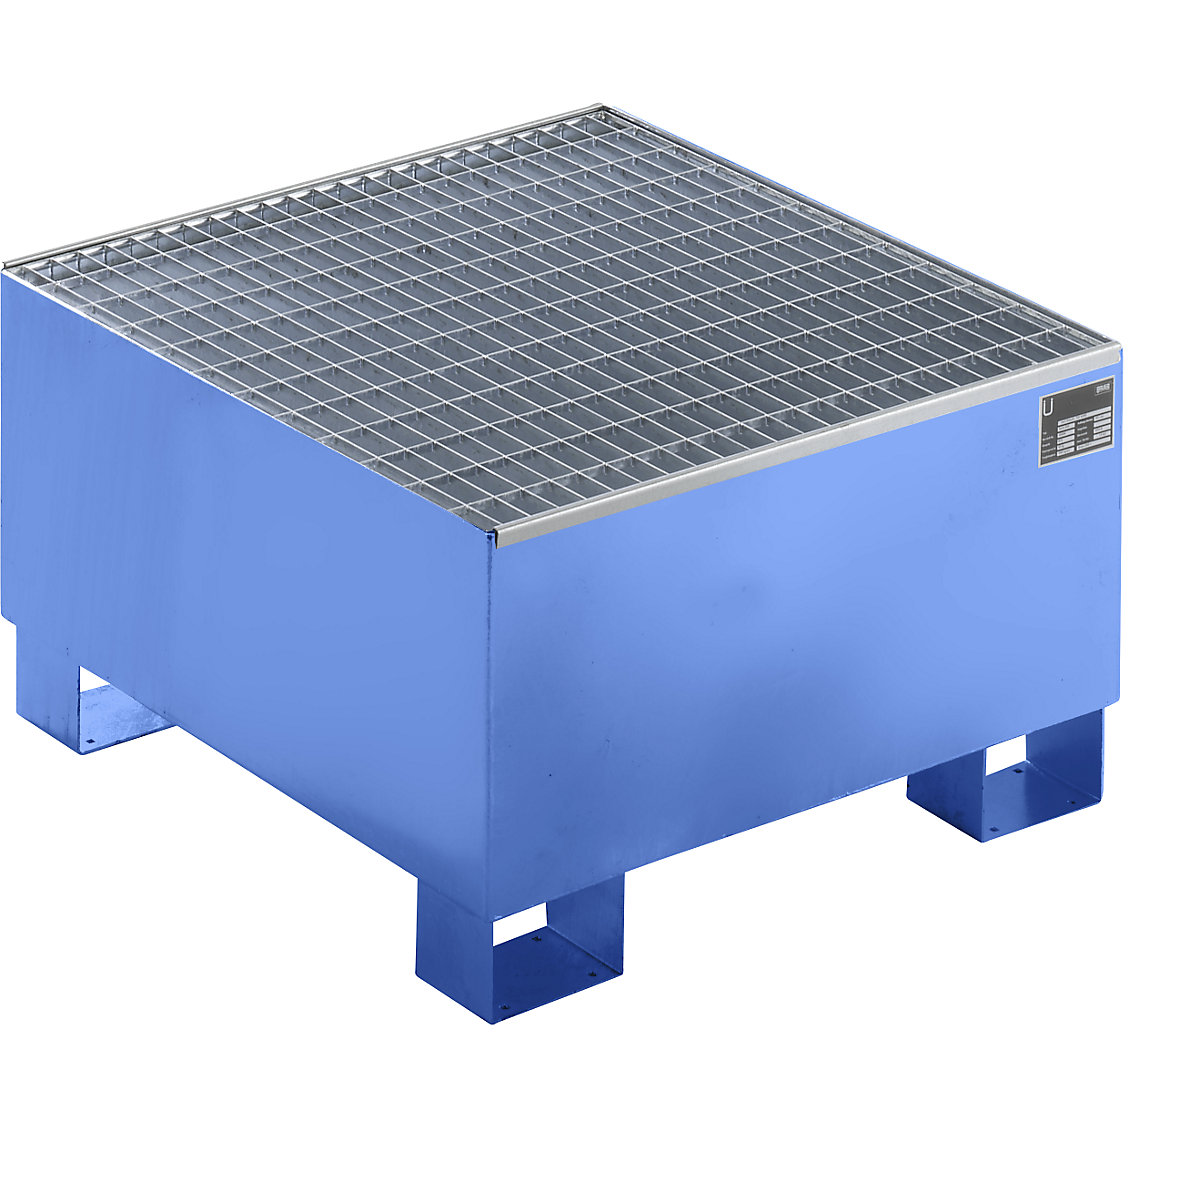 EUROKRAFTbasic – Sump tray made from sheet steel, LxWxH 800 x 800 x 465 mm, blue RAL 5012, with grate